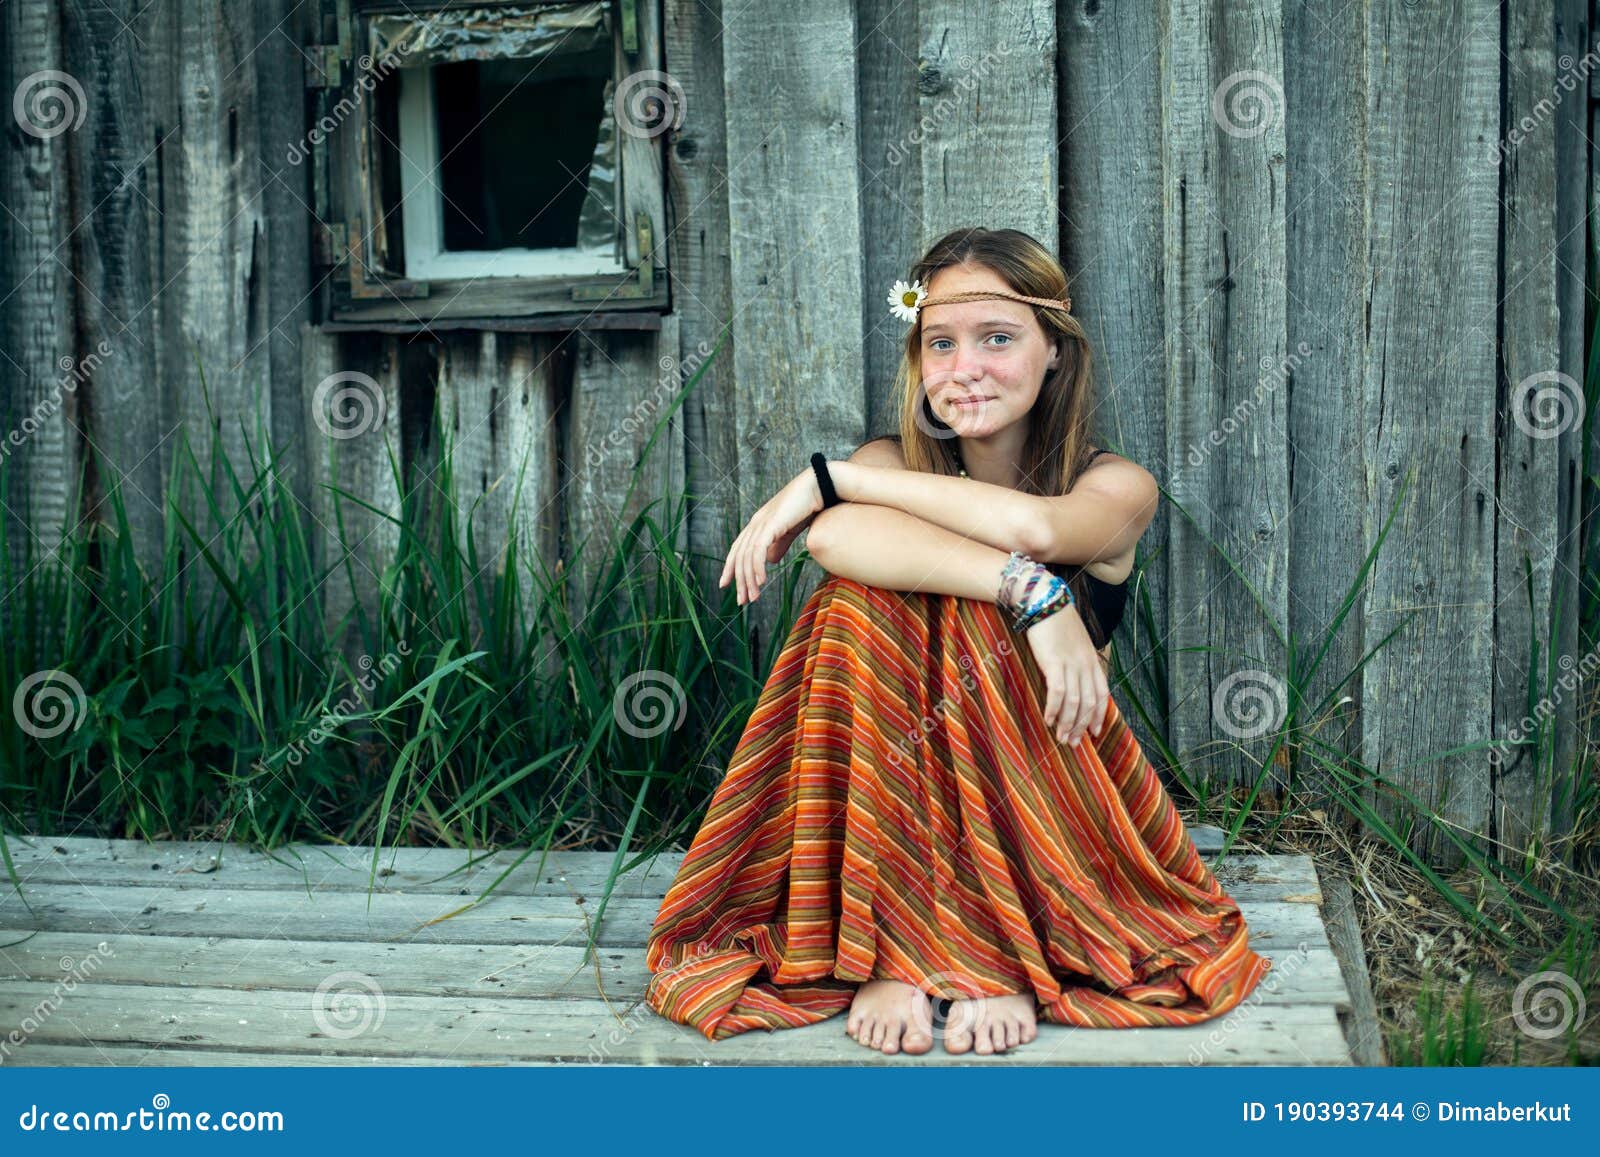 A Young Happy Hippie Girl, in the Village Stock Photo - Image of relax ...